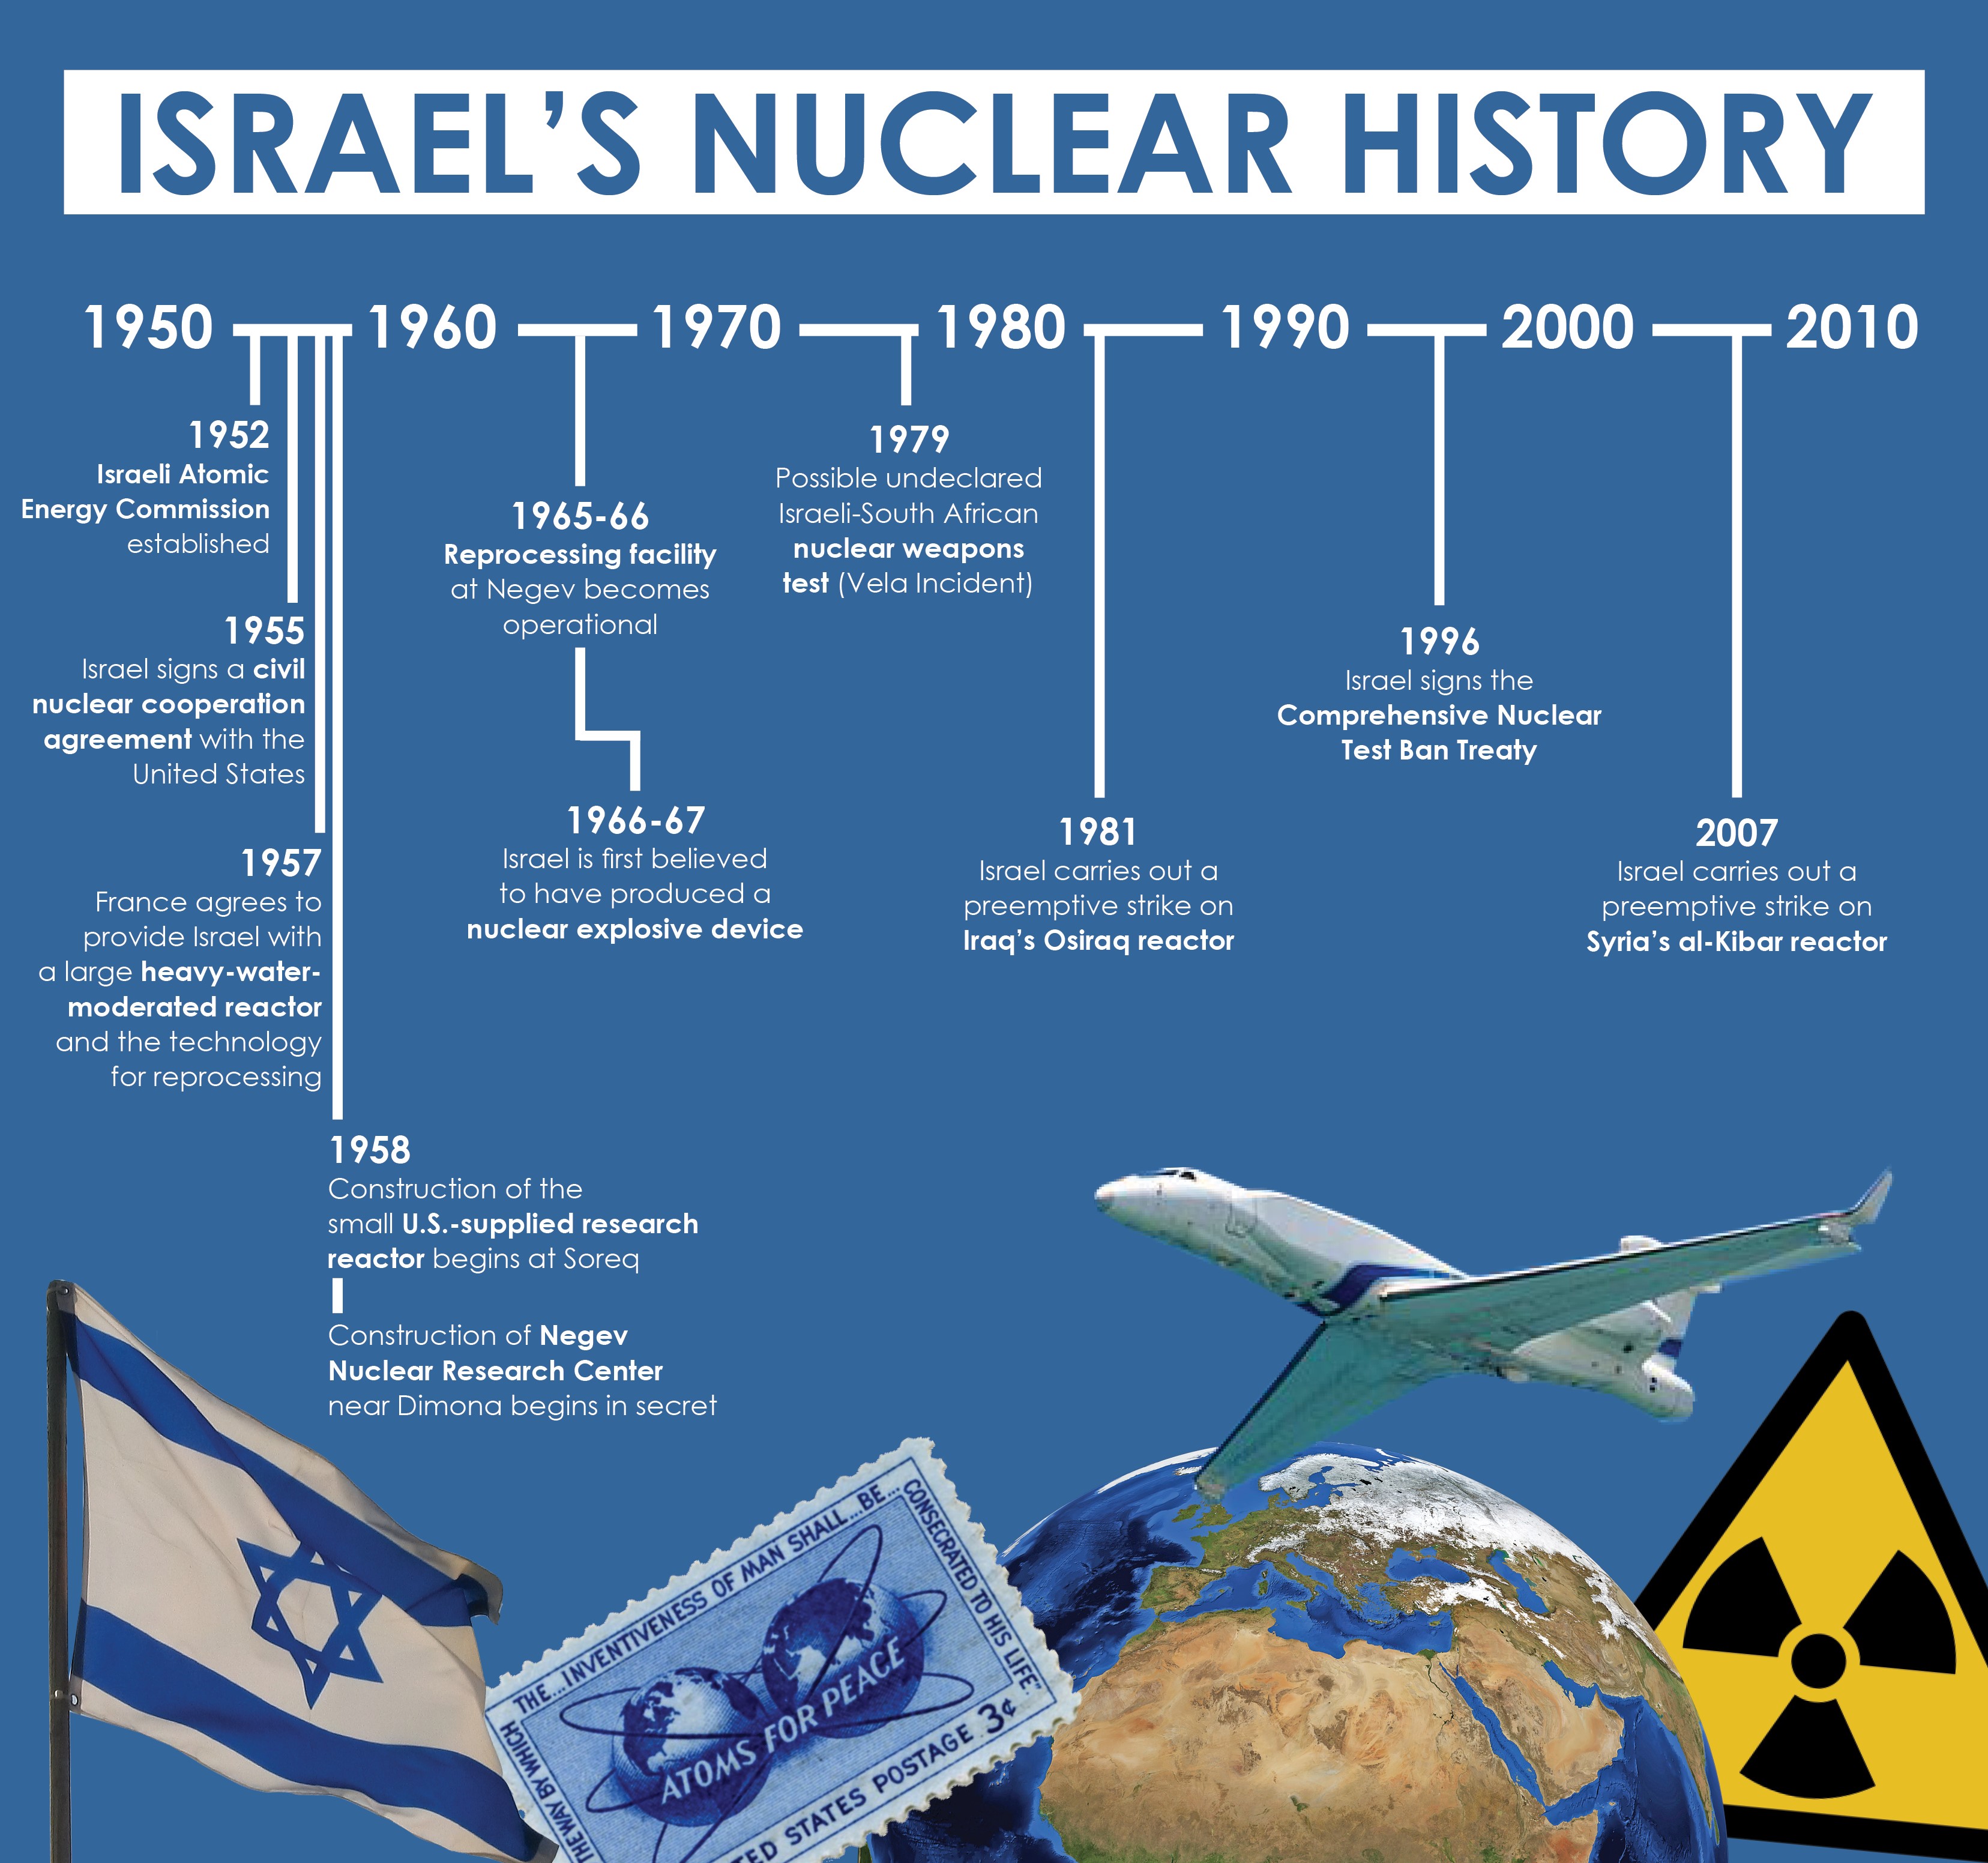 Timeline of Israel's Nuclear Development.